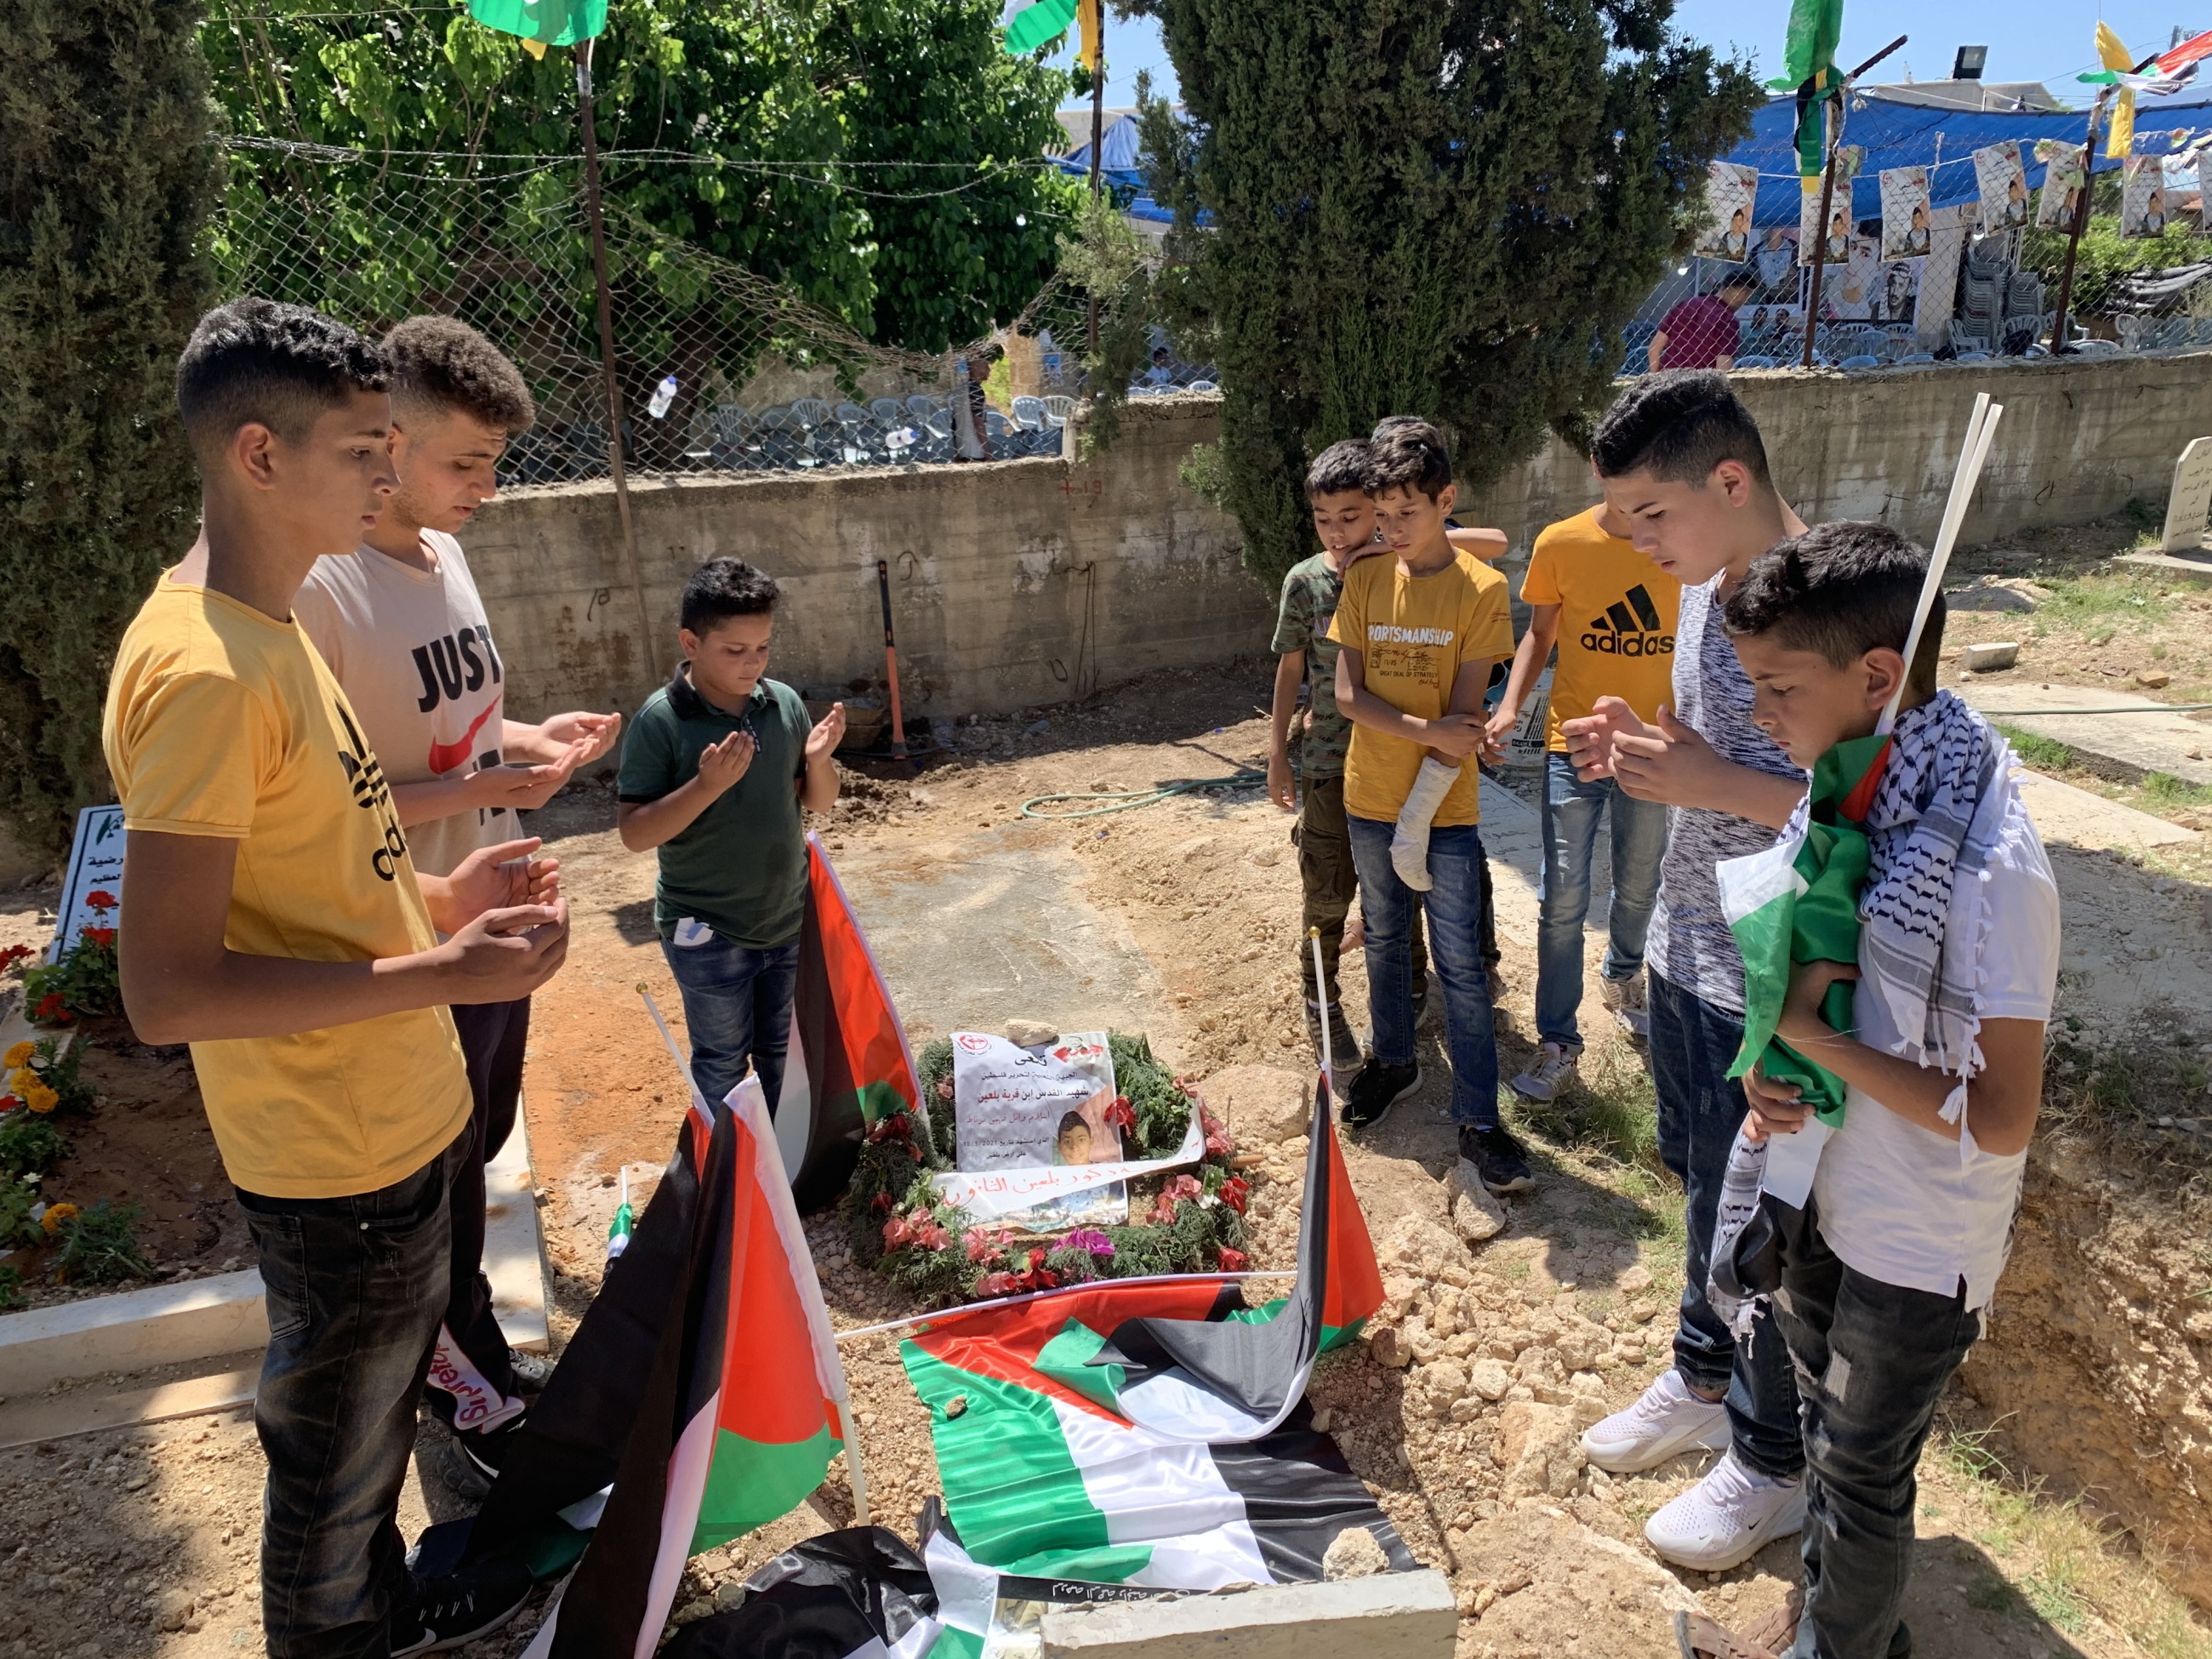 Friends of Islam Burnat recite a prayer for him at his grave. Burnat was shot dead by Israeli forces.